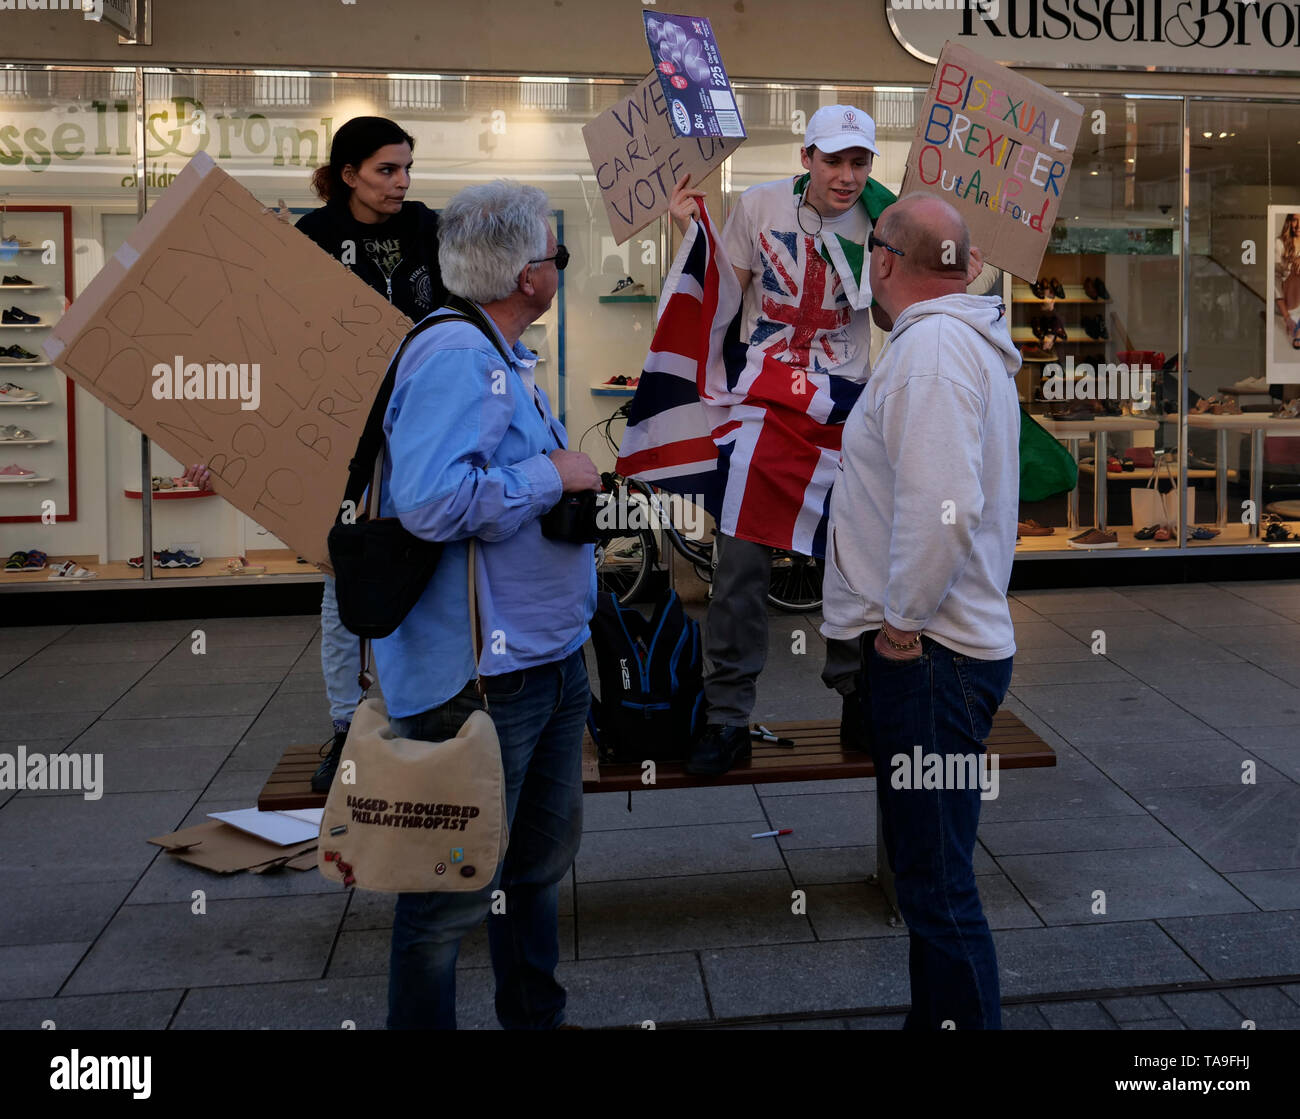 Exeter, UK. 22nd May, 2019. Labour Party rally in Bedford Street and Hustings at Exeter Cathedral. Two UKIP supporters try but fail to disrupt the meeting Credit: Anthony Collins/Alamy Live News Stock Photo